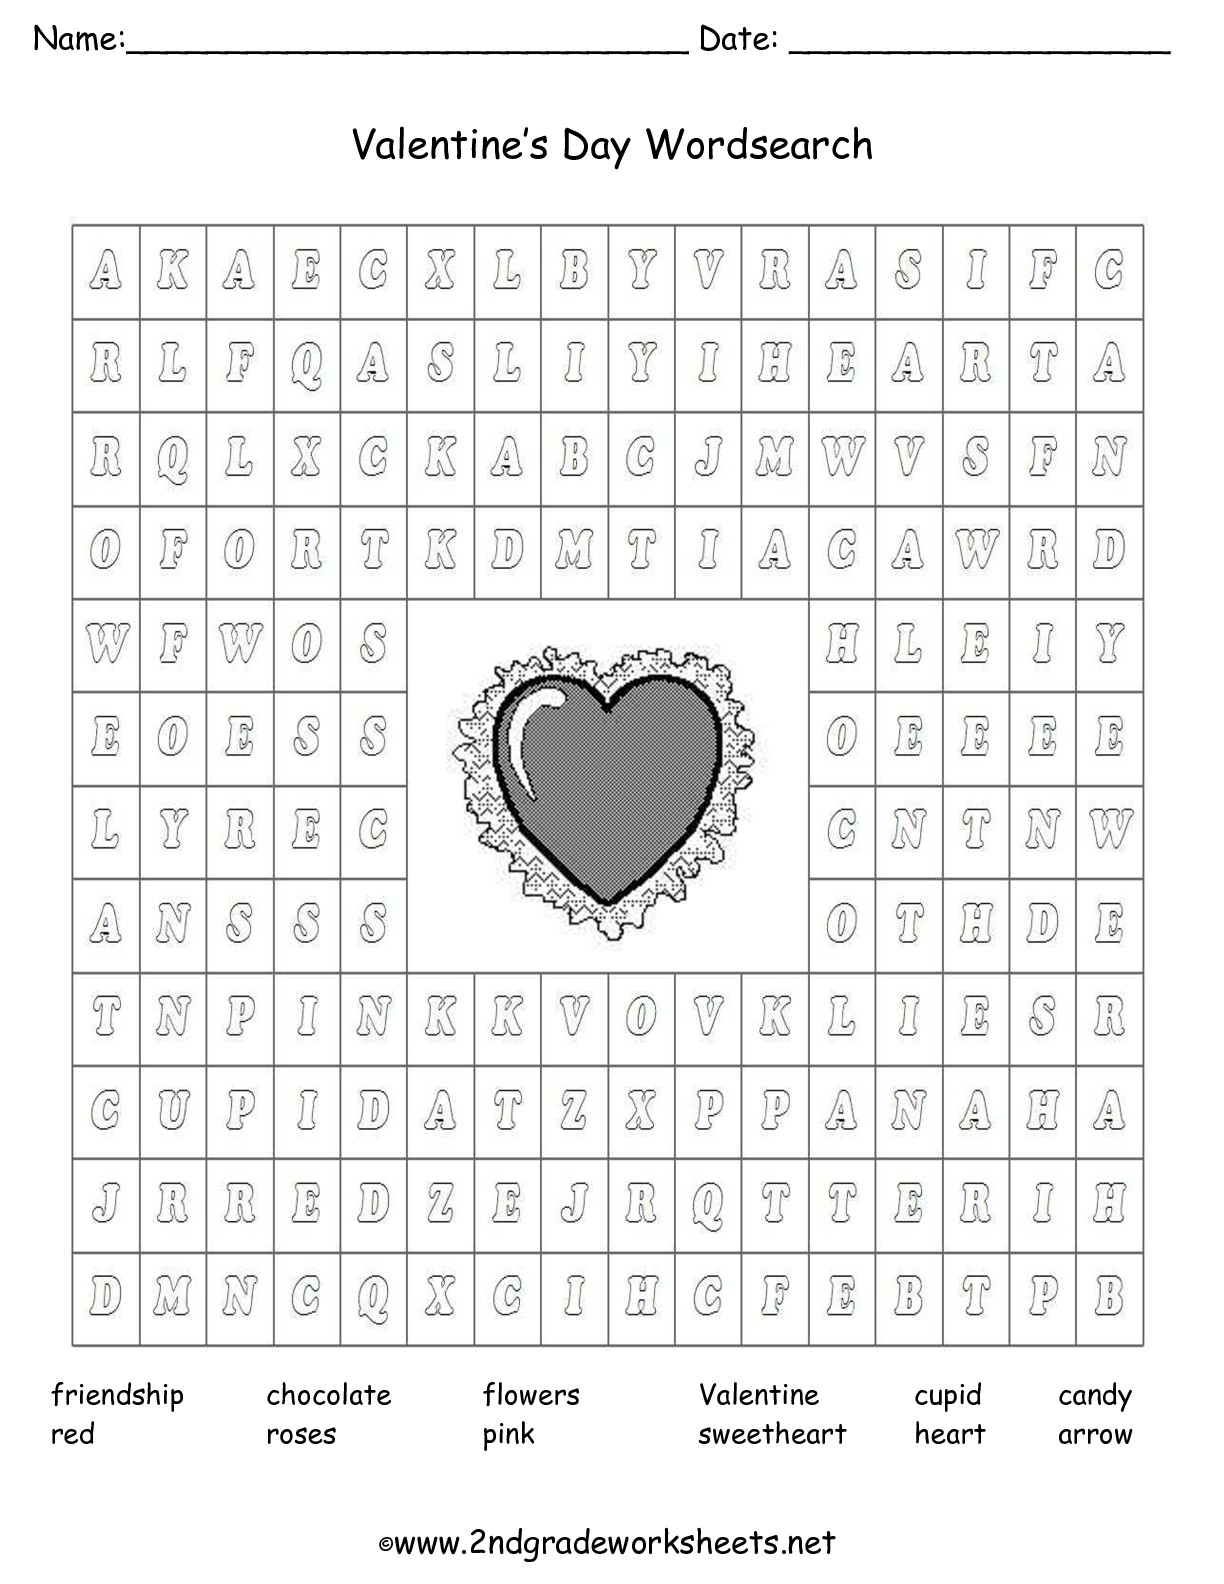 valentine-s-day-printouts-and-worksheets